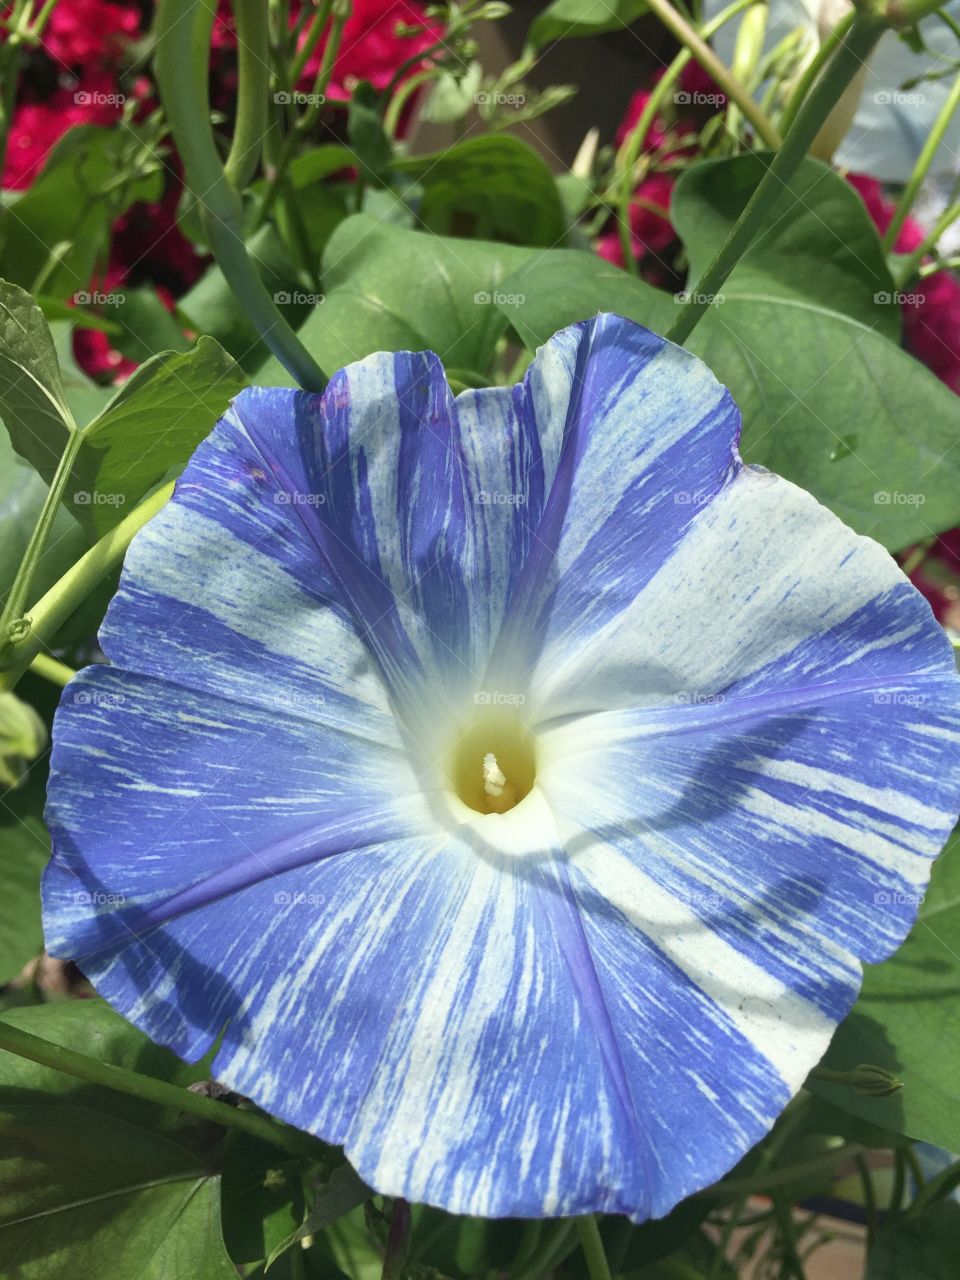 Morning Glory Vine species ‘Flying Saucer’ ‘Ipomoea purpurea’. Stunning blue and white striped morning glory vine with huge blooms! Introduced in the 1960s!